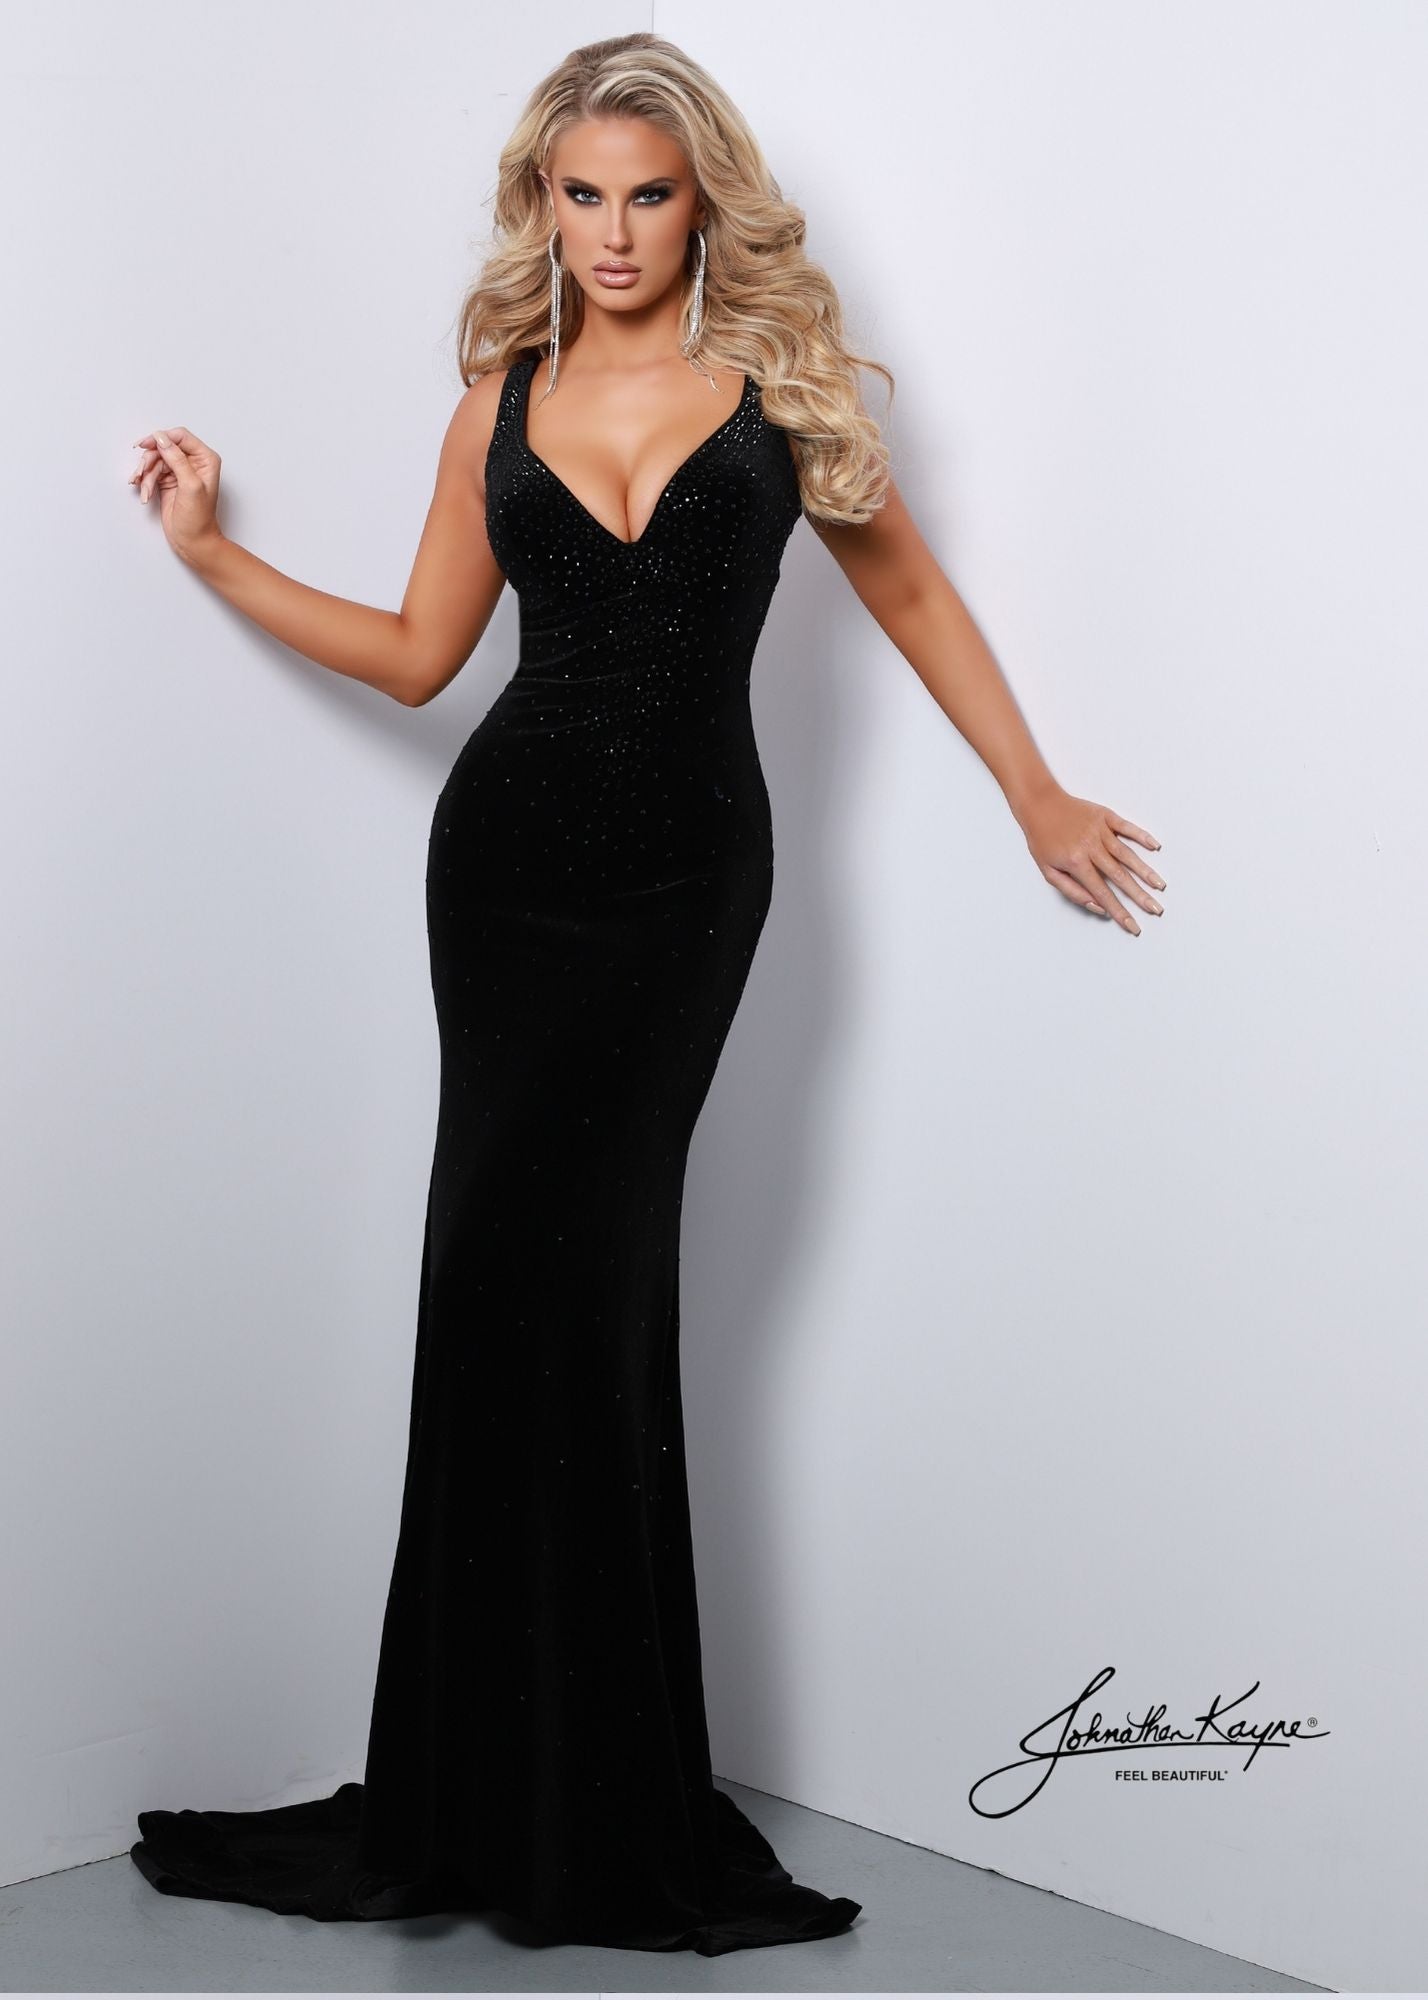 Johnathan Kayne 2445V Long Backless Velvet Crystal Prom Dress Formal Pageant Gown One of JK fan faves, 2445 but in VELVET! The criss-cross back is flattering to the frame and the hot-fix crystals make this gown sparkle all night long.  Colors: Emerald, Black  Sizes: 00, 0, 2, 4, 6, 8, 10, 12, 14, 16  Fabric Stretch Velvet, Stretch Lining